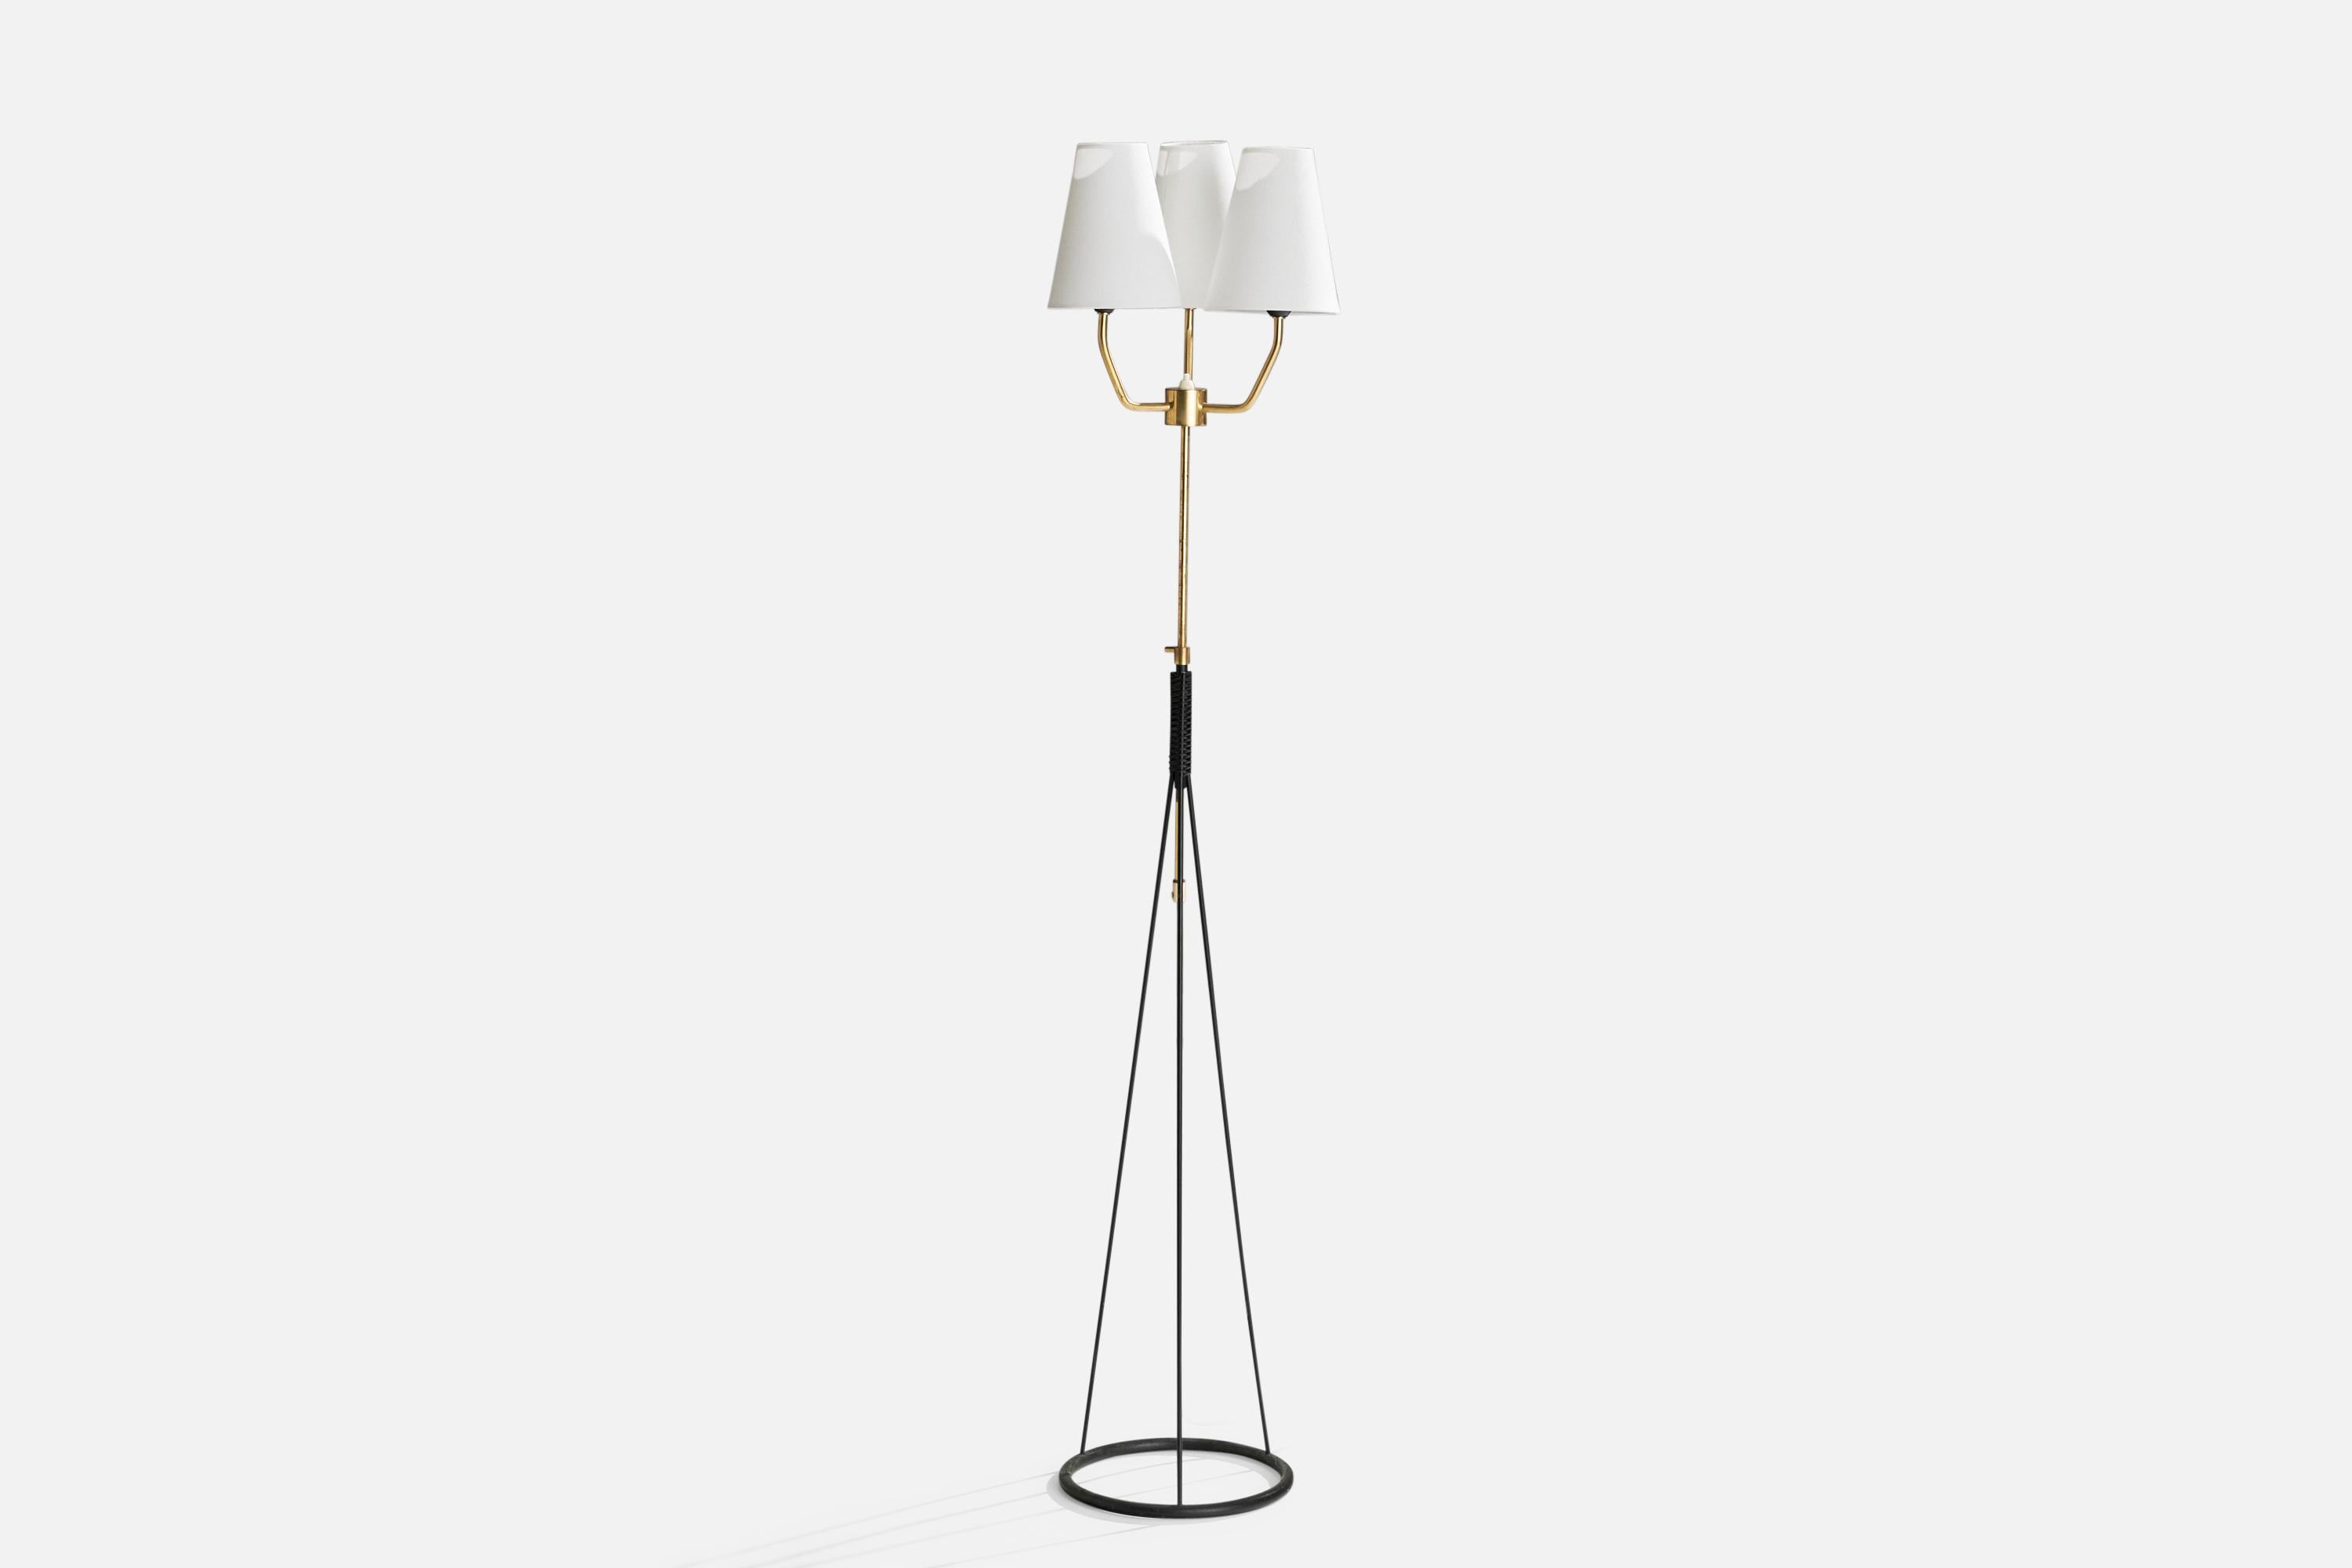 An adjustable brass, black-lacquered metal, white fabric and rubber floor lamp designed and produced in Sweden, c. 1960s.

Overall Dimensions (inches): 60.63”  H x 11.42” W x 11.42” D
Stated dimensions include shade.
Bulb Specifications: E-26